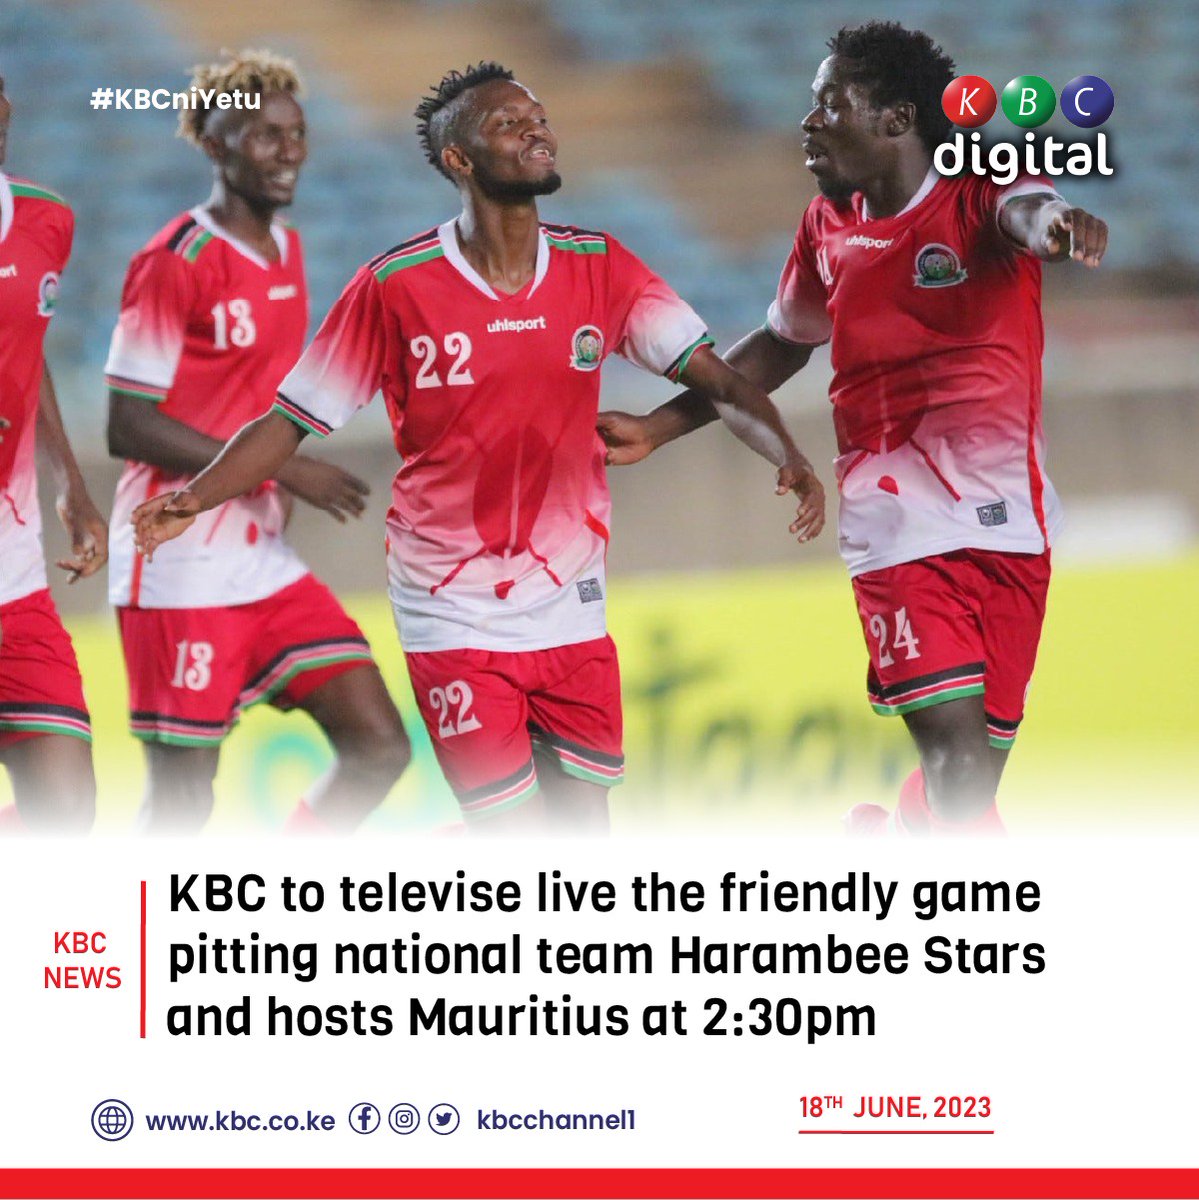 Watch the Mauritius vs Harambee Stars game on KBC Channel One.